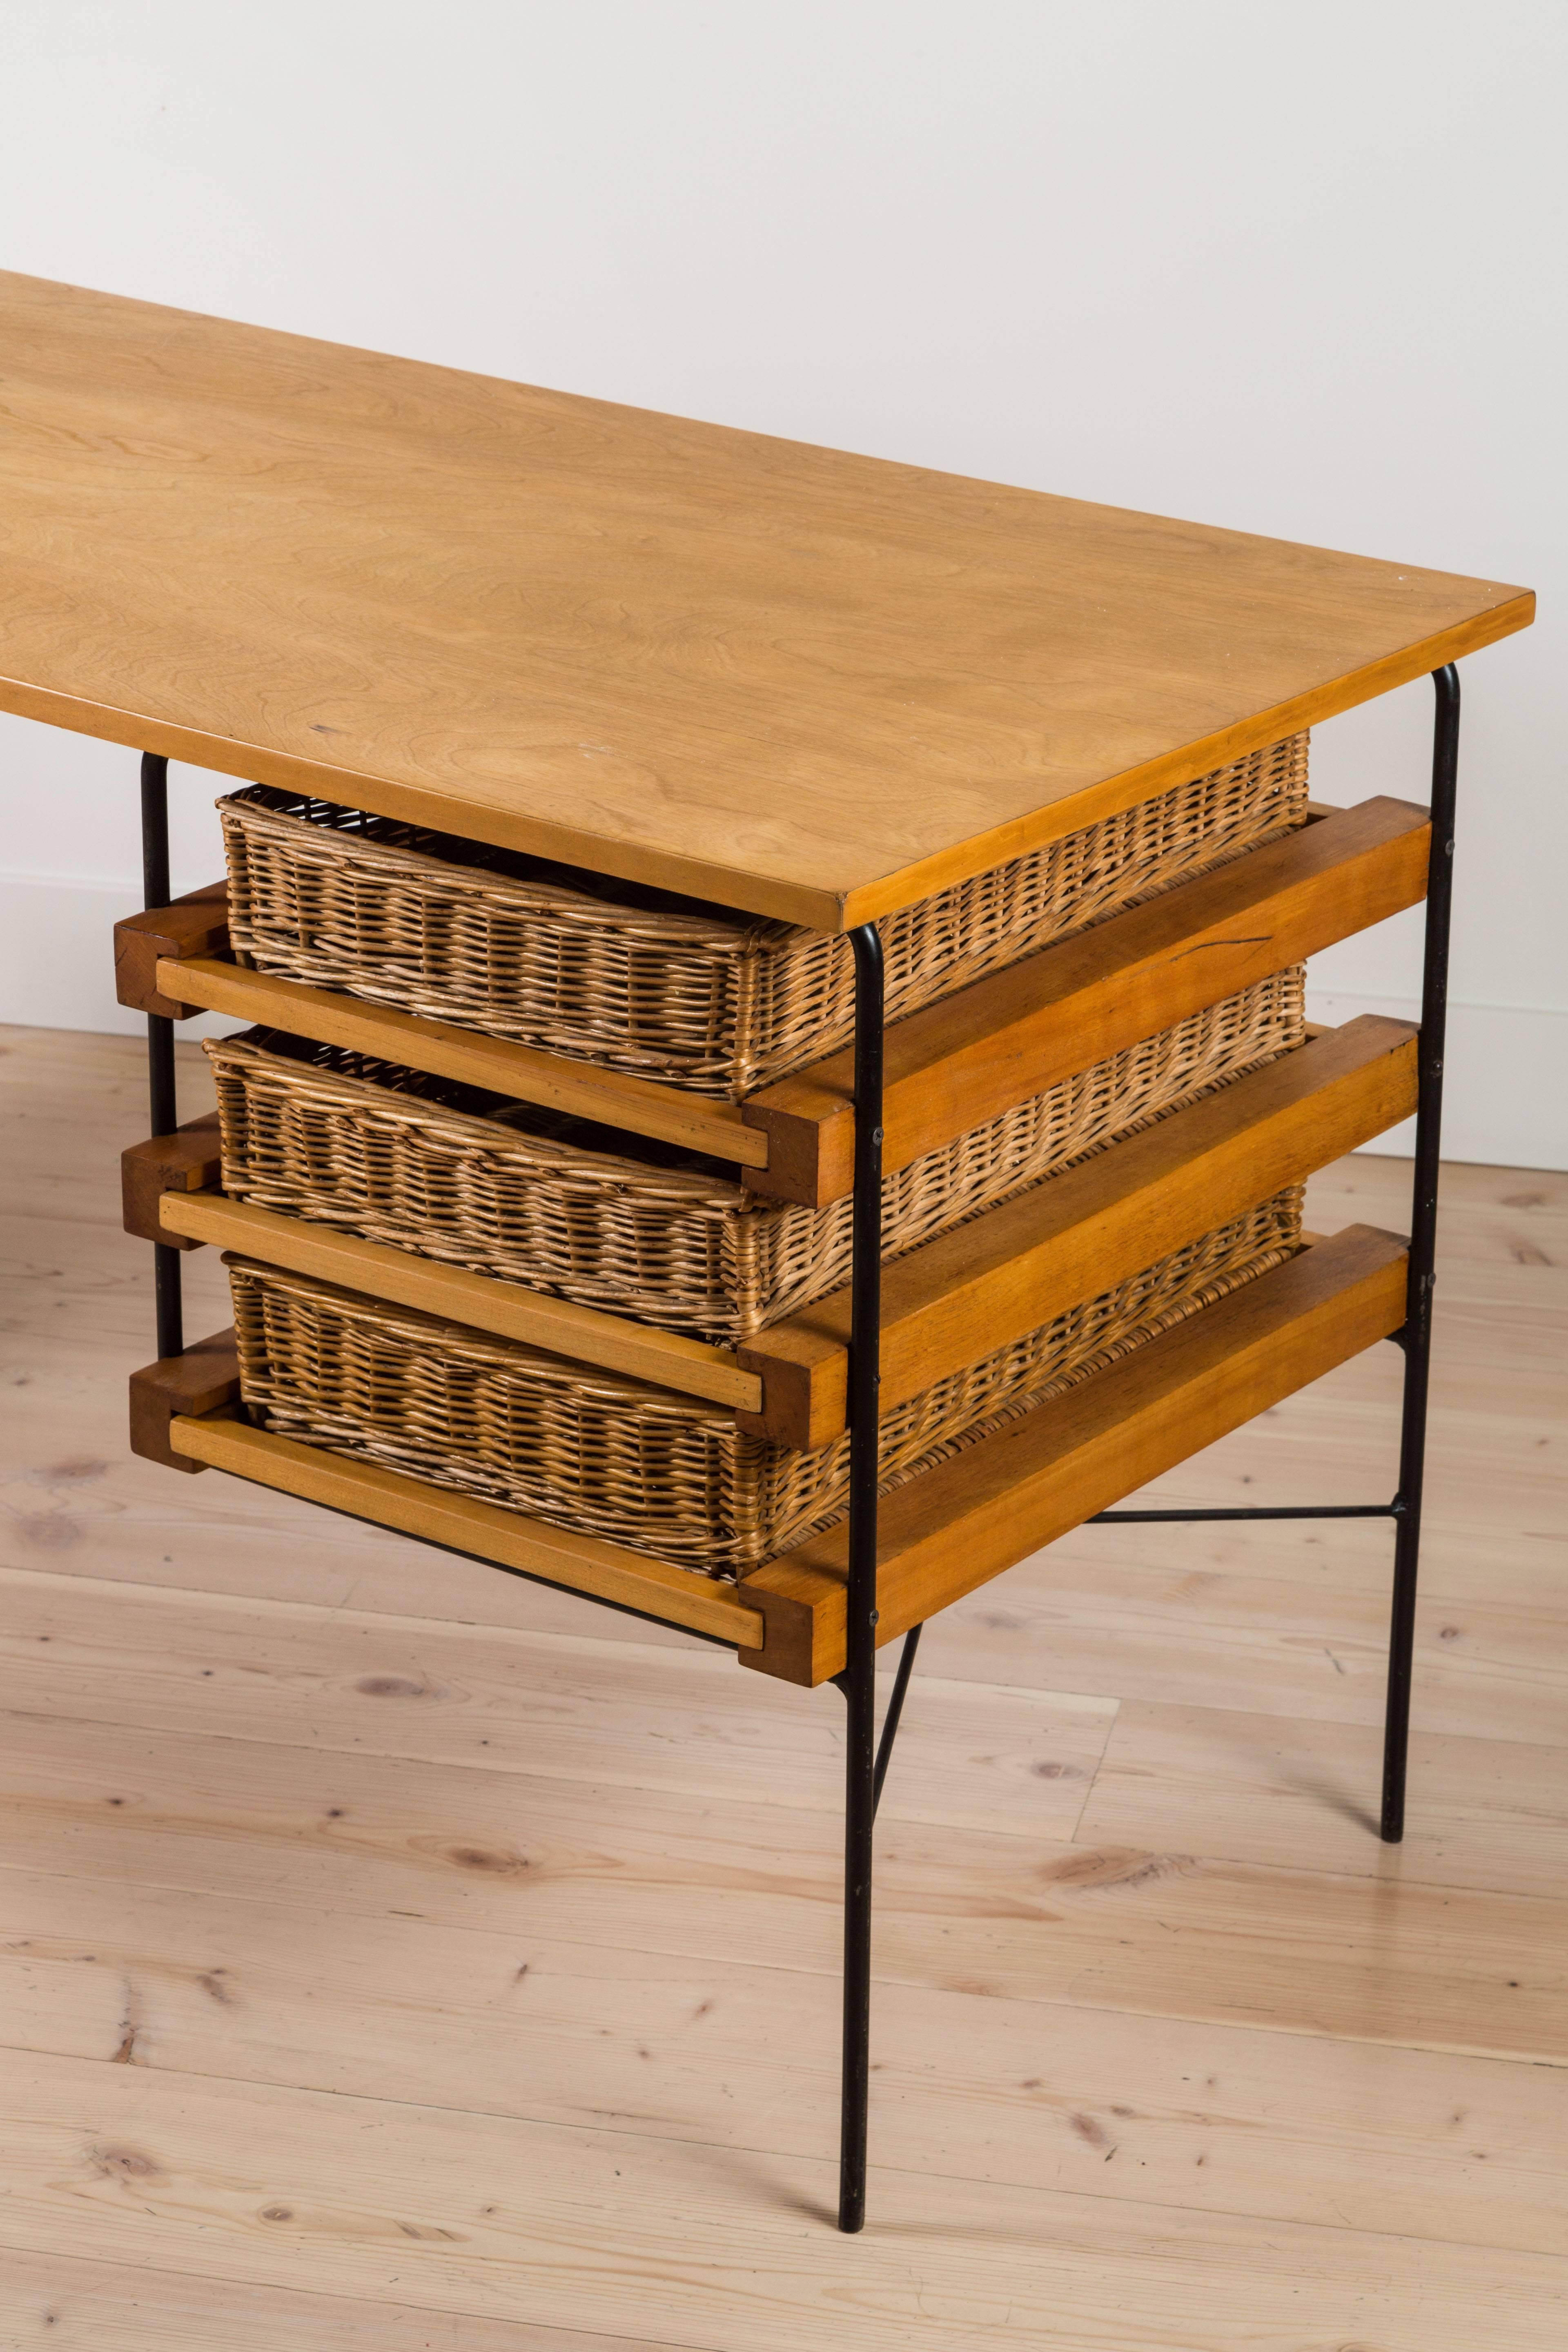 Rattan Iron and Maple Desk by Dorothy Schindele for Modern Color CA